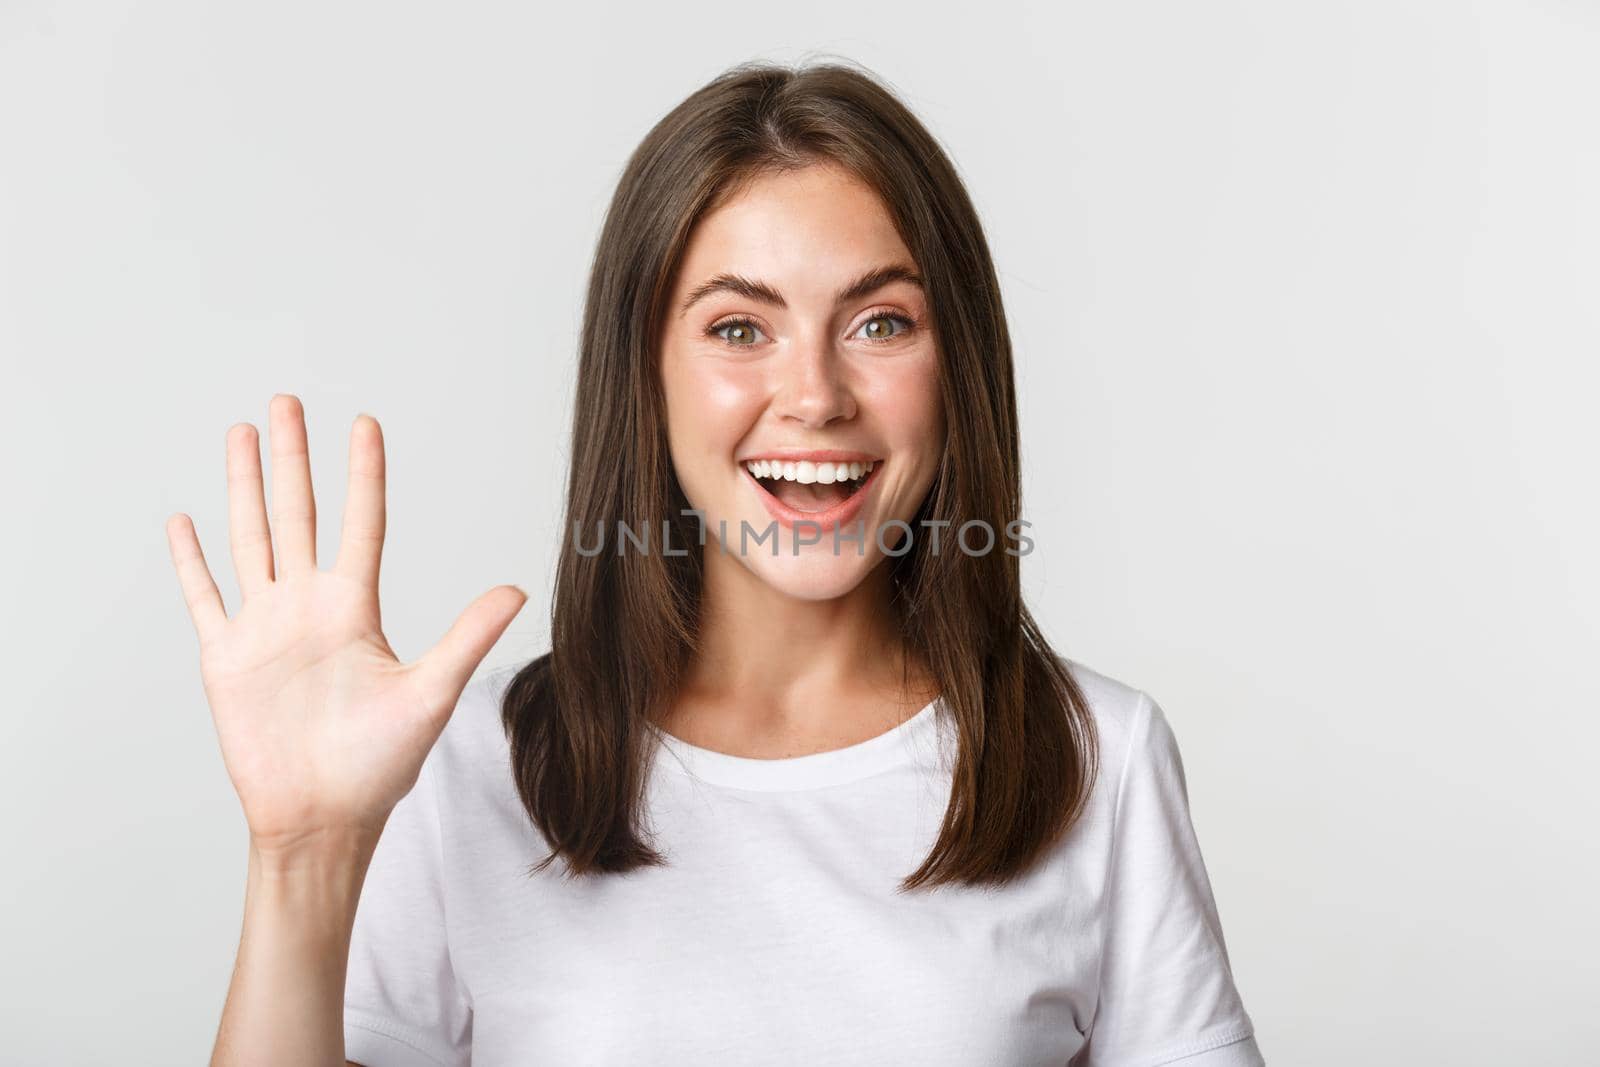 Close-up of cheerful attractive young woman smiling, showing five fingers, white background.